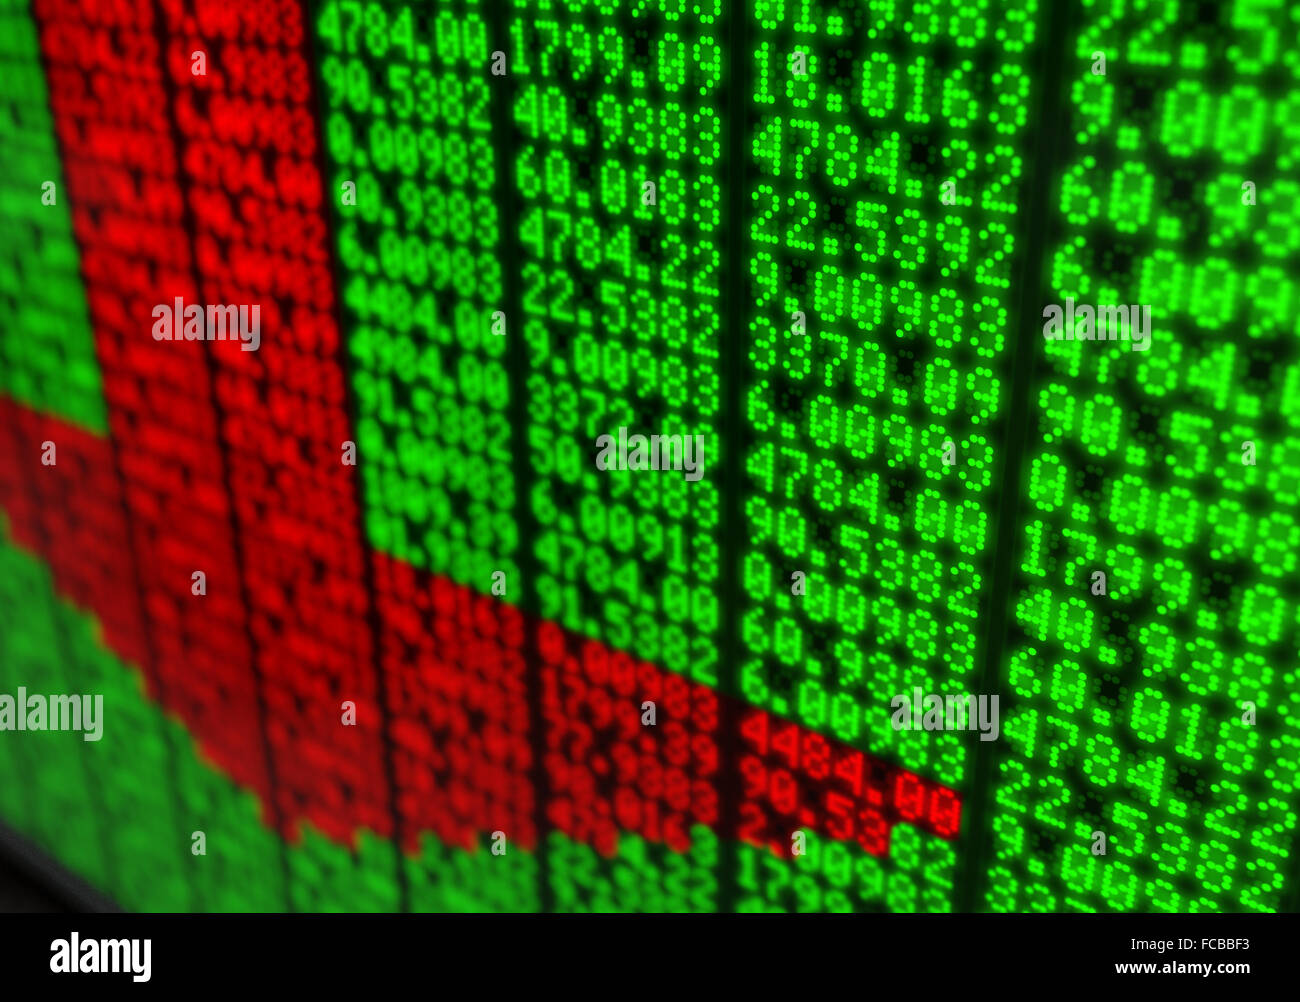 A flat section of a digital stock market indicator board with red numbers making up a downward facing arrow Stock Photo